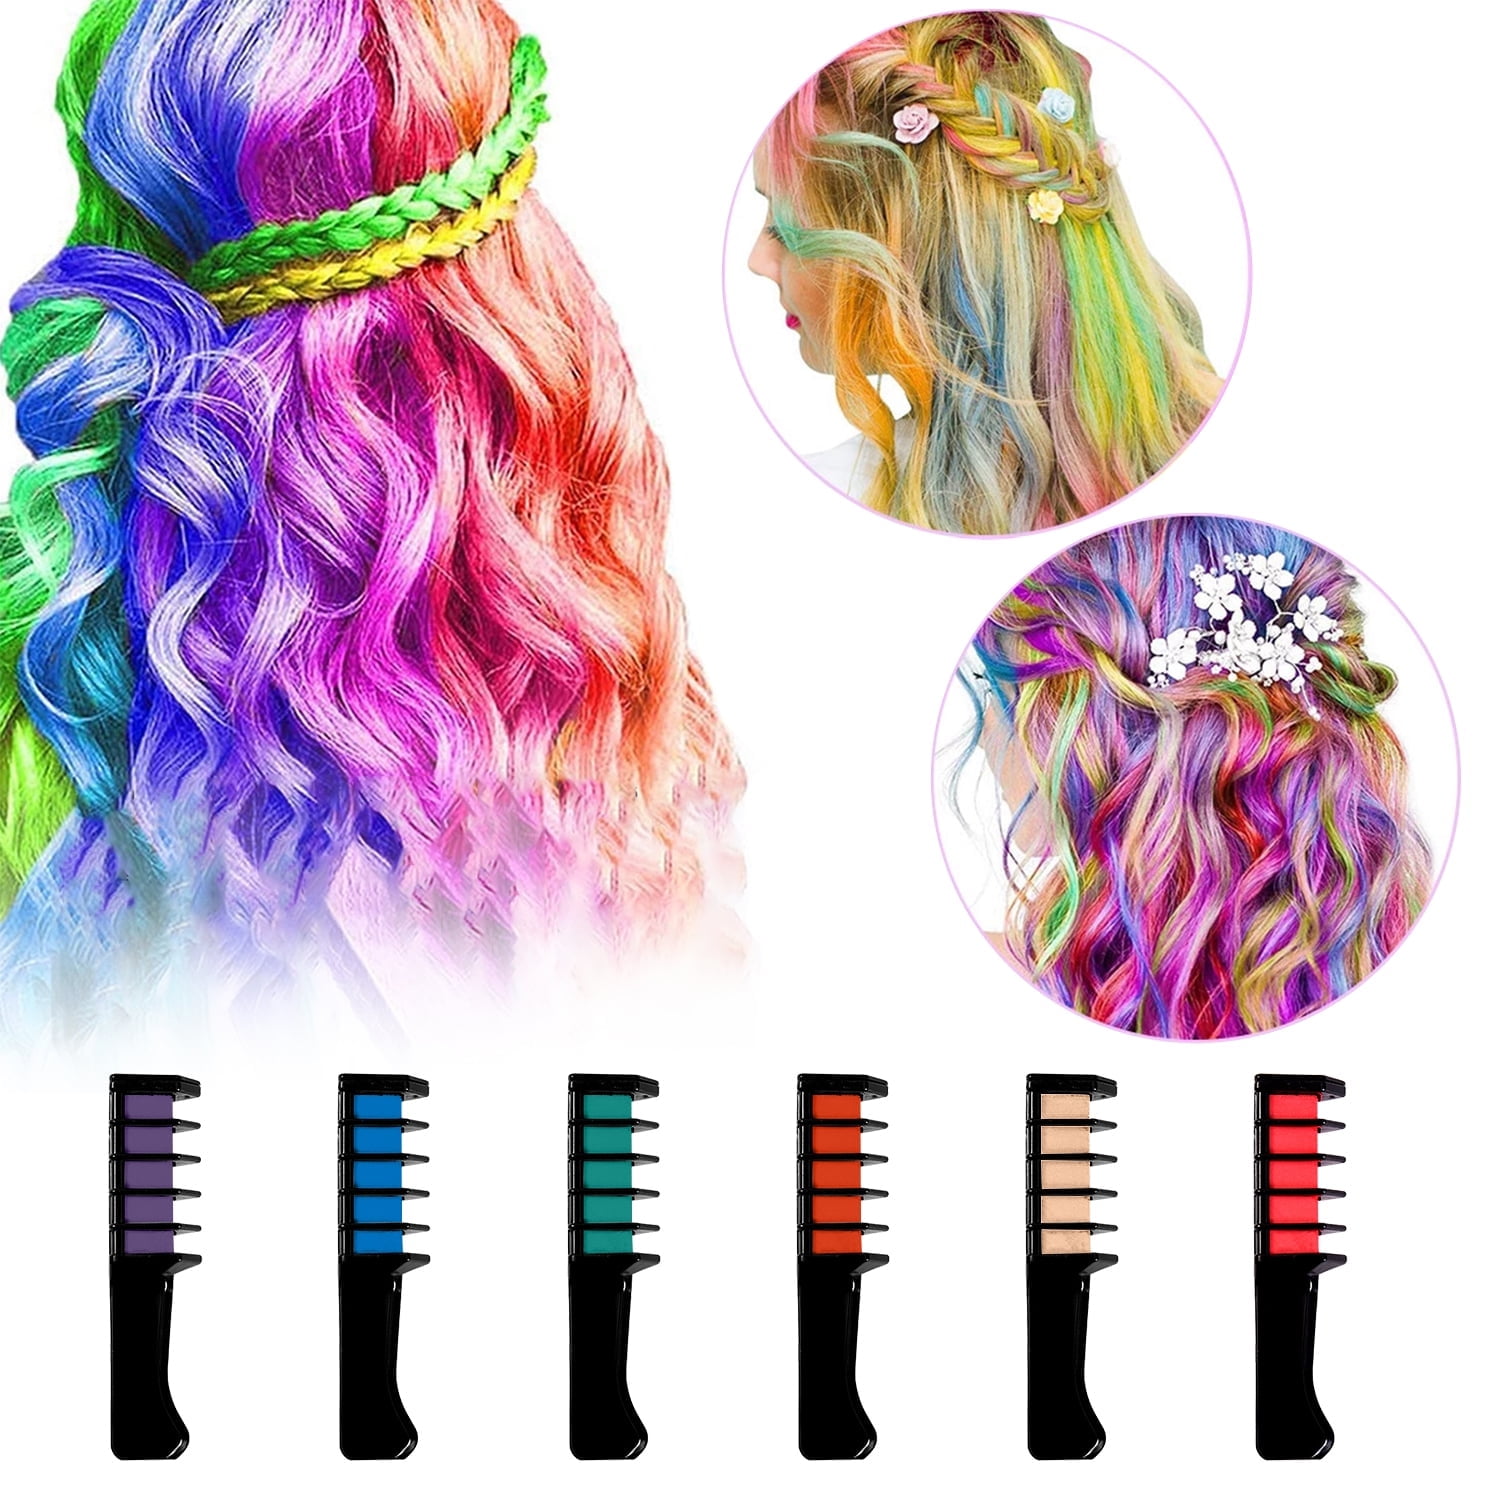  Ruby's Hair Chalk for Girls - Kids Temporary And Washable Hair  Color - Cool Girl Gifts Age 4 5 6 7 8 9 10 11 12 And up. : Toys & Games